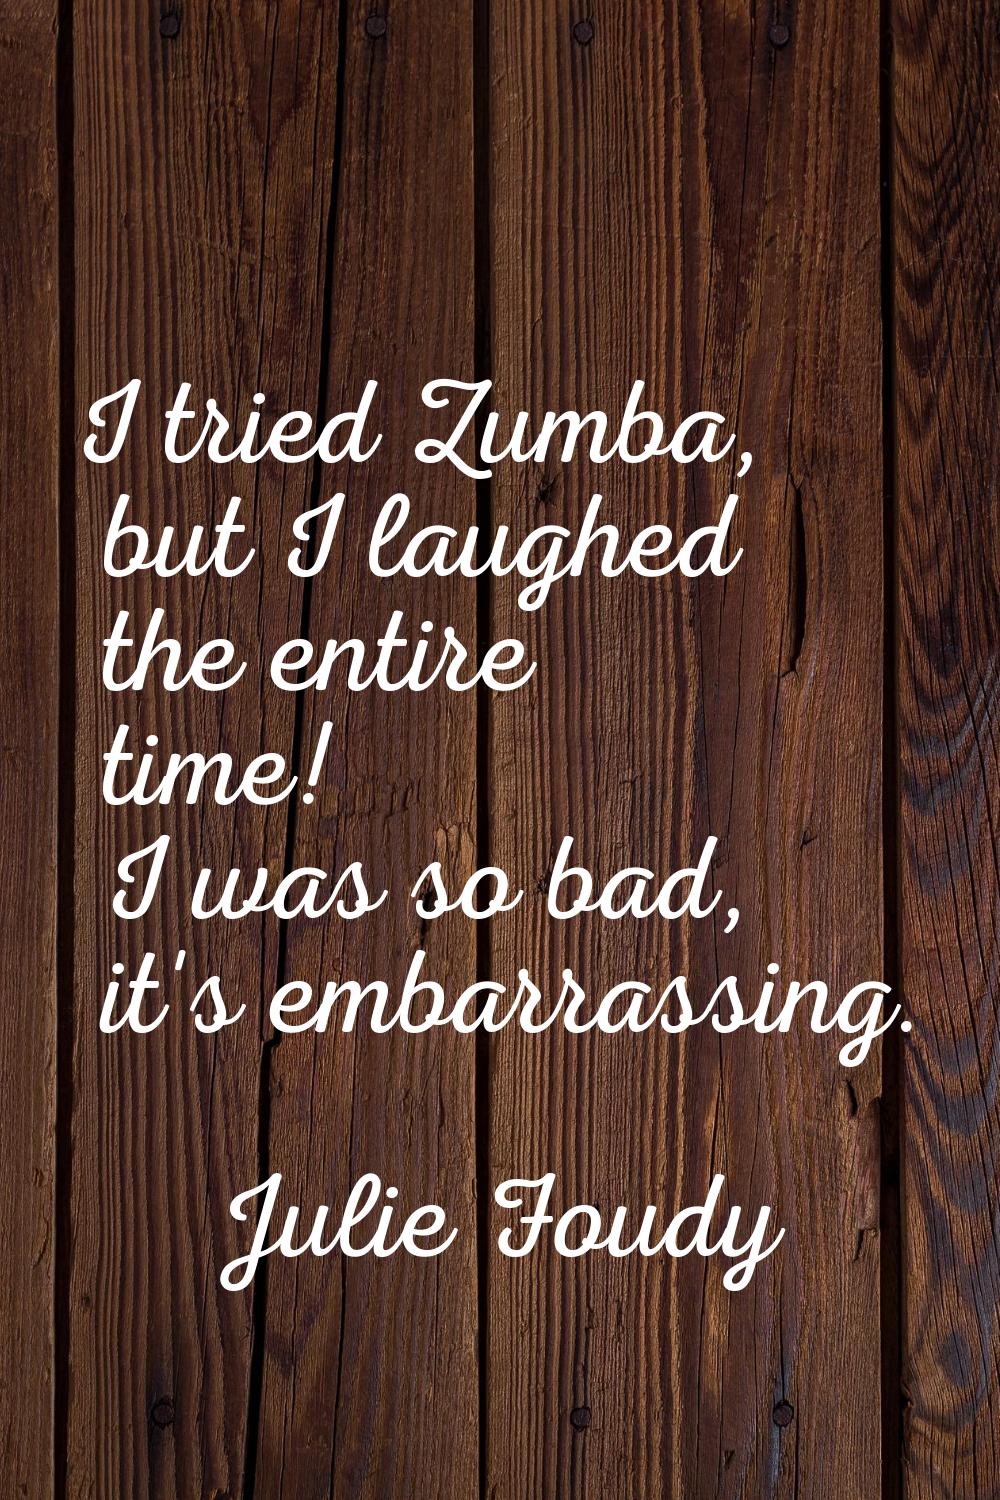 I tried Zumba, but I laughed the entire time! I was so bad, it's embarrassing.